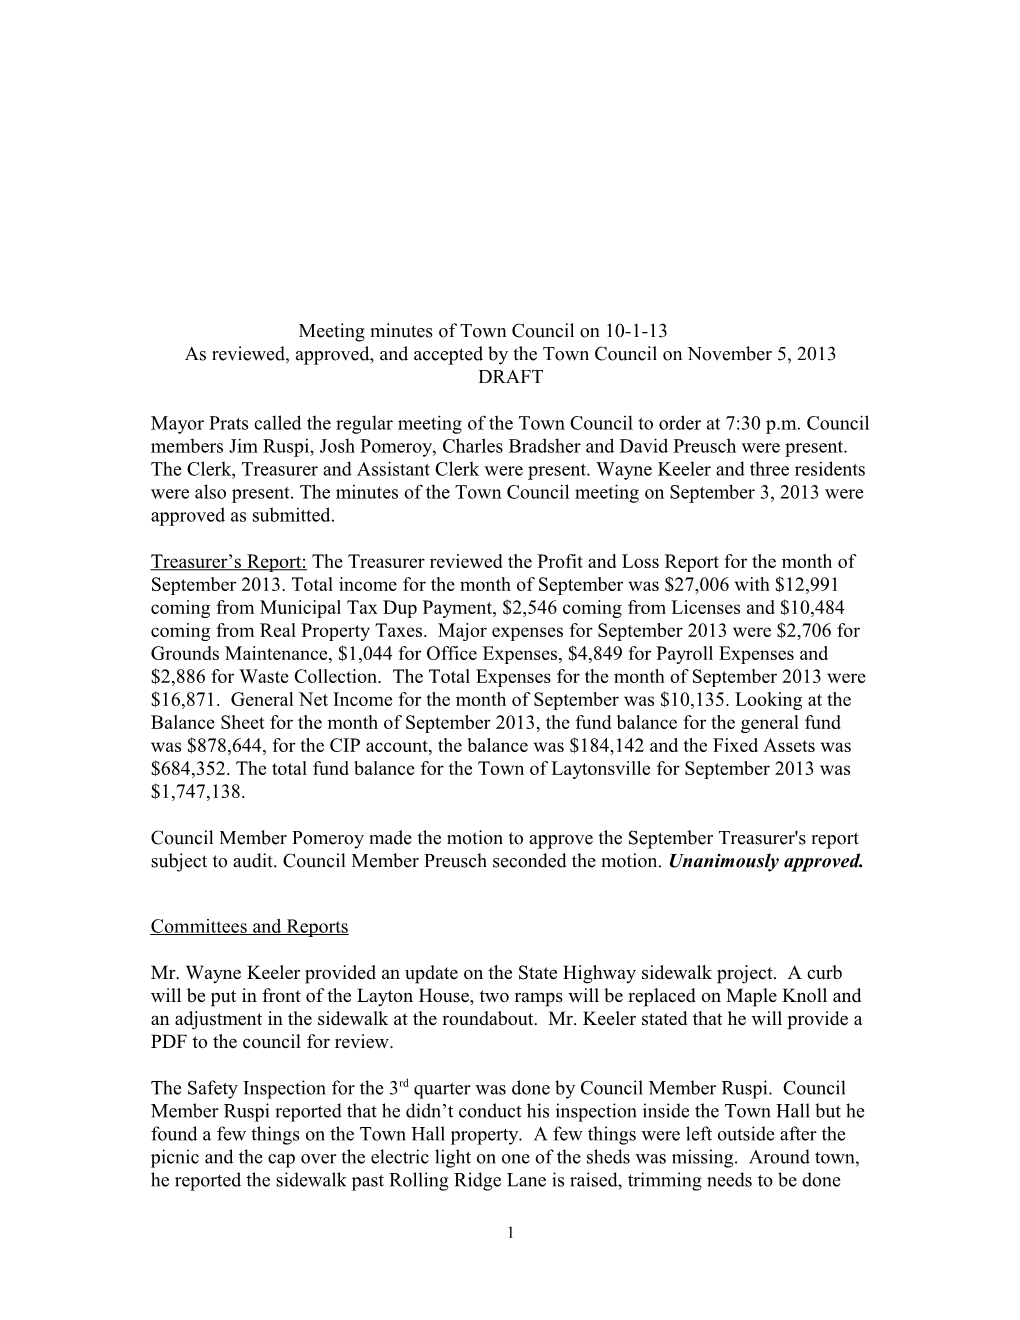 Meeting Minutes of Town Council on 8-2-11